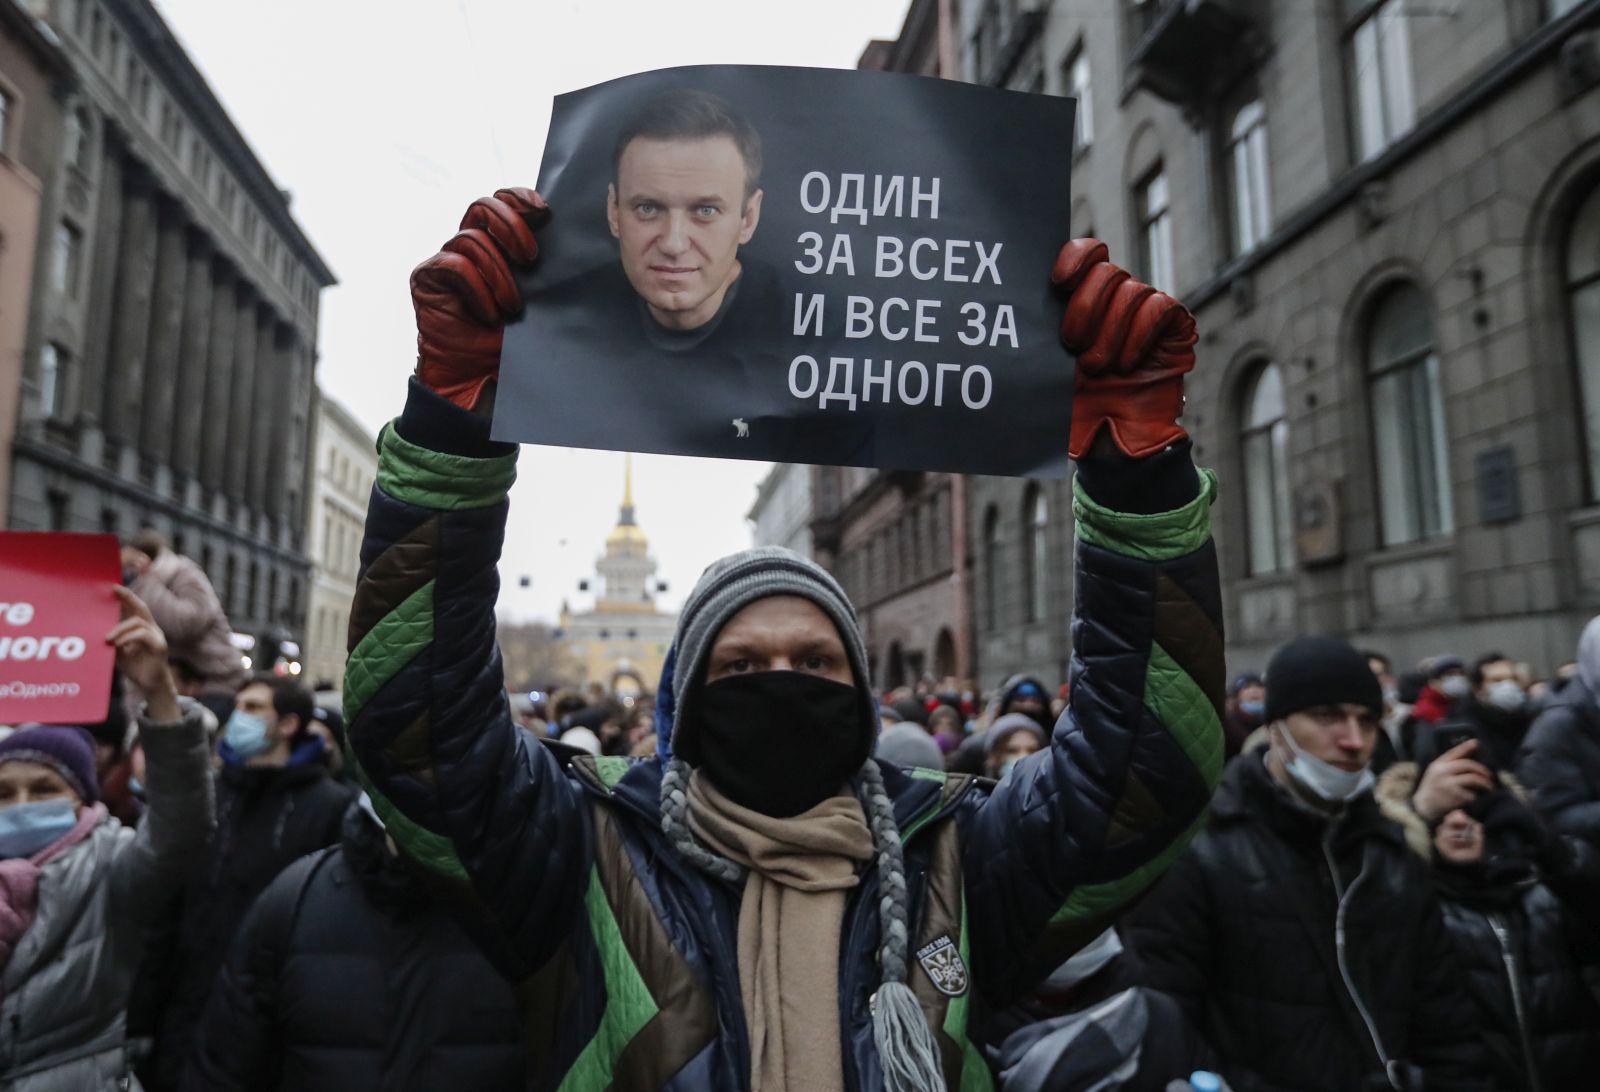 epa08959951 A protester holds a poster that reads 'One for all and all for one', during an unauthorized protest in support of Russian opposition leader and blogger Alexei Navalny, in St. Petersburg, Russia, 23 January 2021. Navalny was detained after his arrival to Moscow from Germany on 17 January 2021. A Moscow judge on 18 January ruled that he will remain in custody for 30 days following his airport arrest. Navalny urged Russians to take to the streets to protest. In many Russian cities mass events are prohibited due to an increasing number of cases of the COVID-19 pandemic caused by the SARS CoV-2 coronavirus.  EPA/ANATOLY MALTSEV